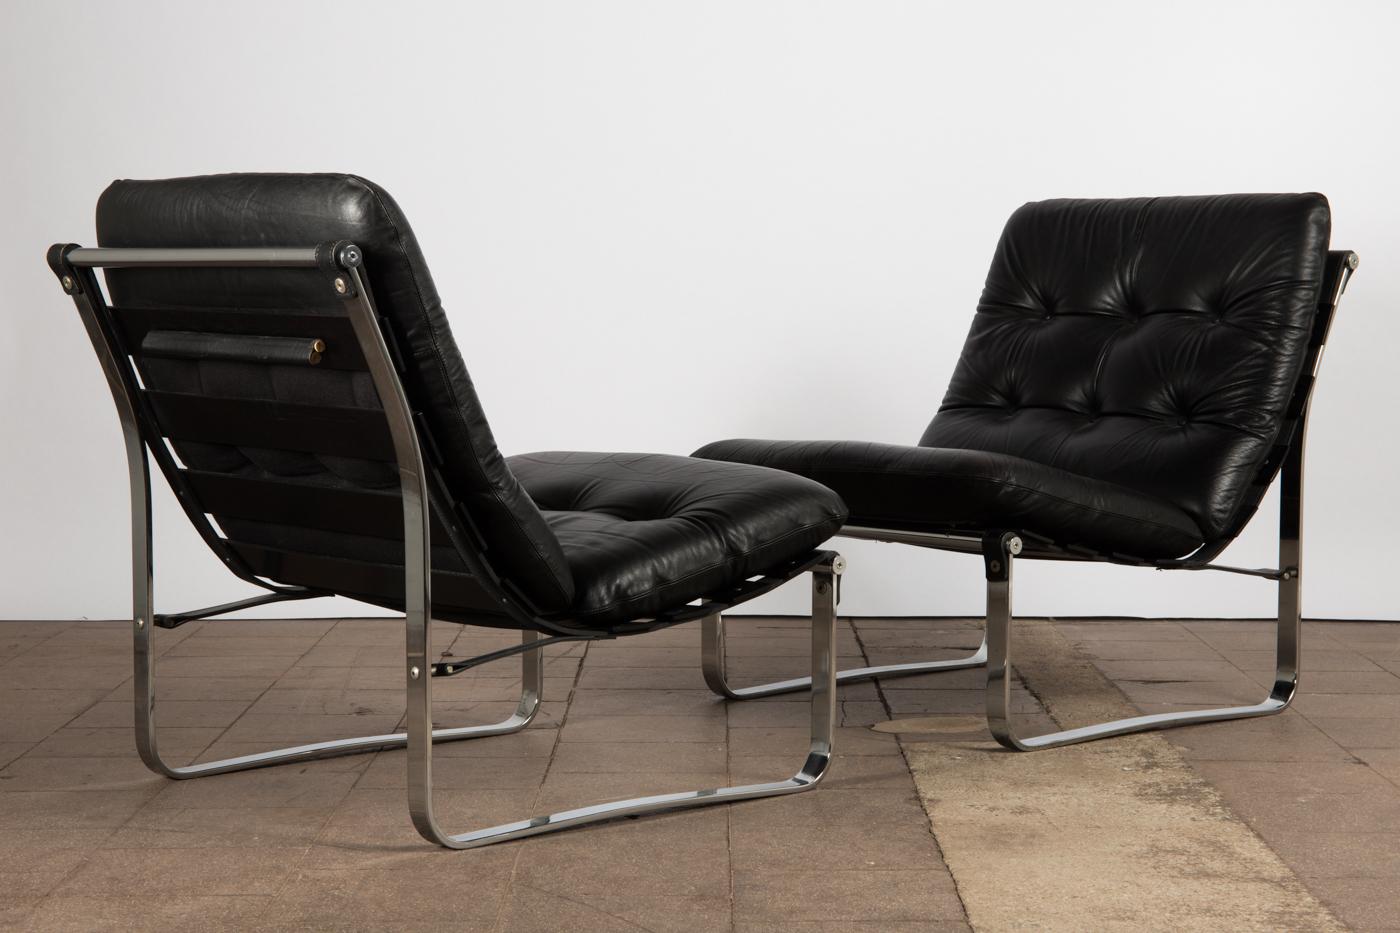 Pair of Mid-Century Modern, Black Leather Spring Lounge Chairs by Ingmar Relling For Sale 4